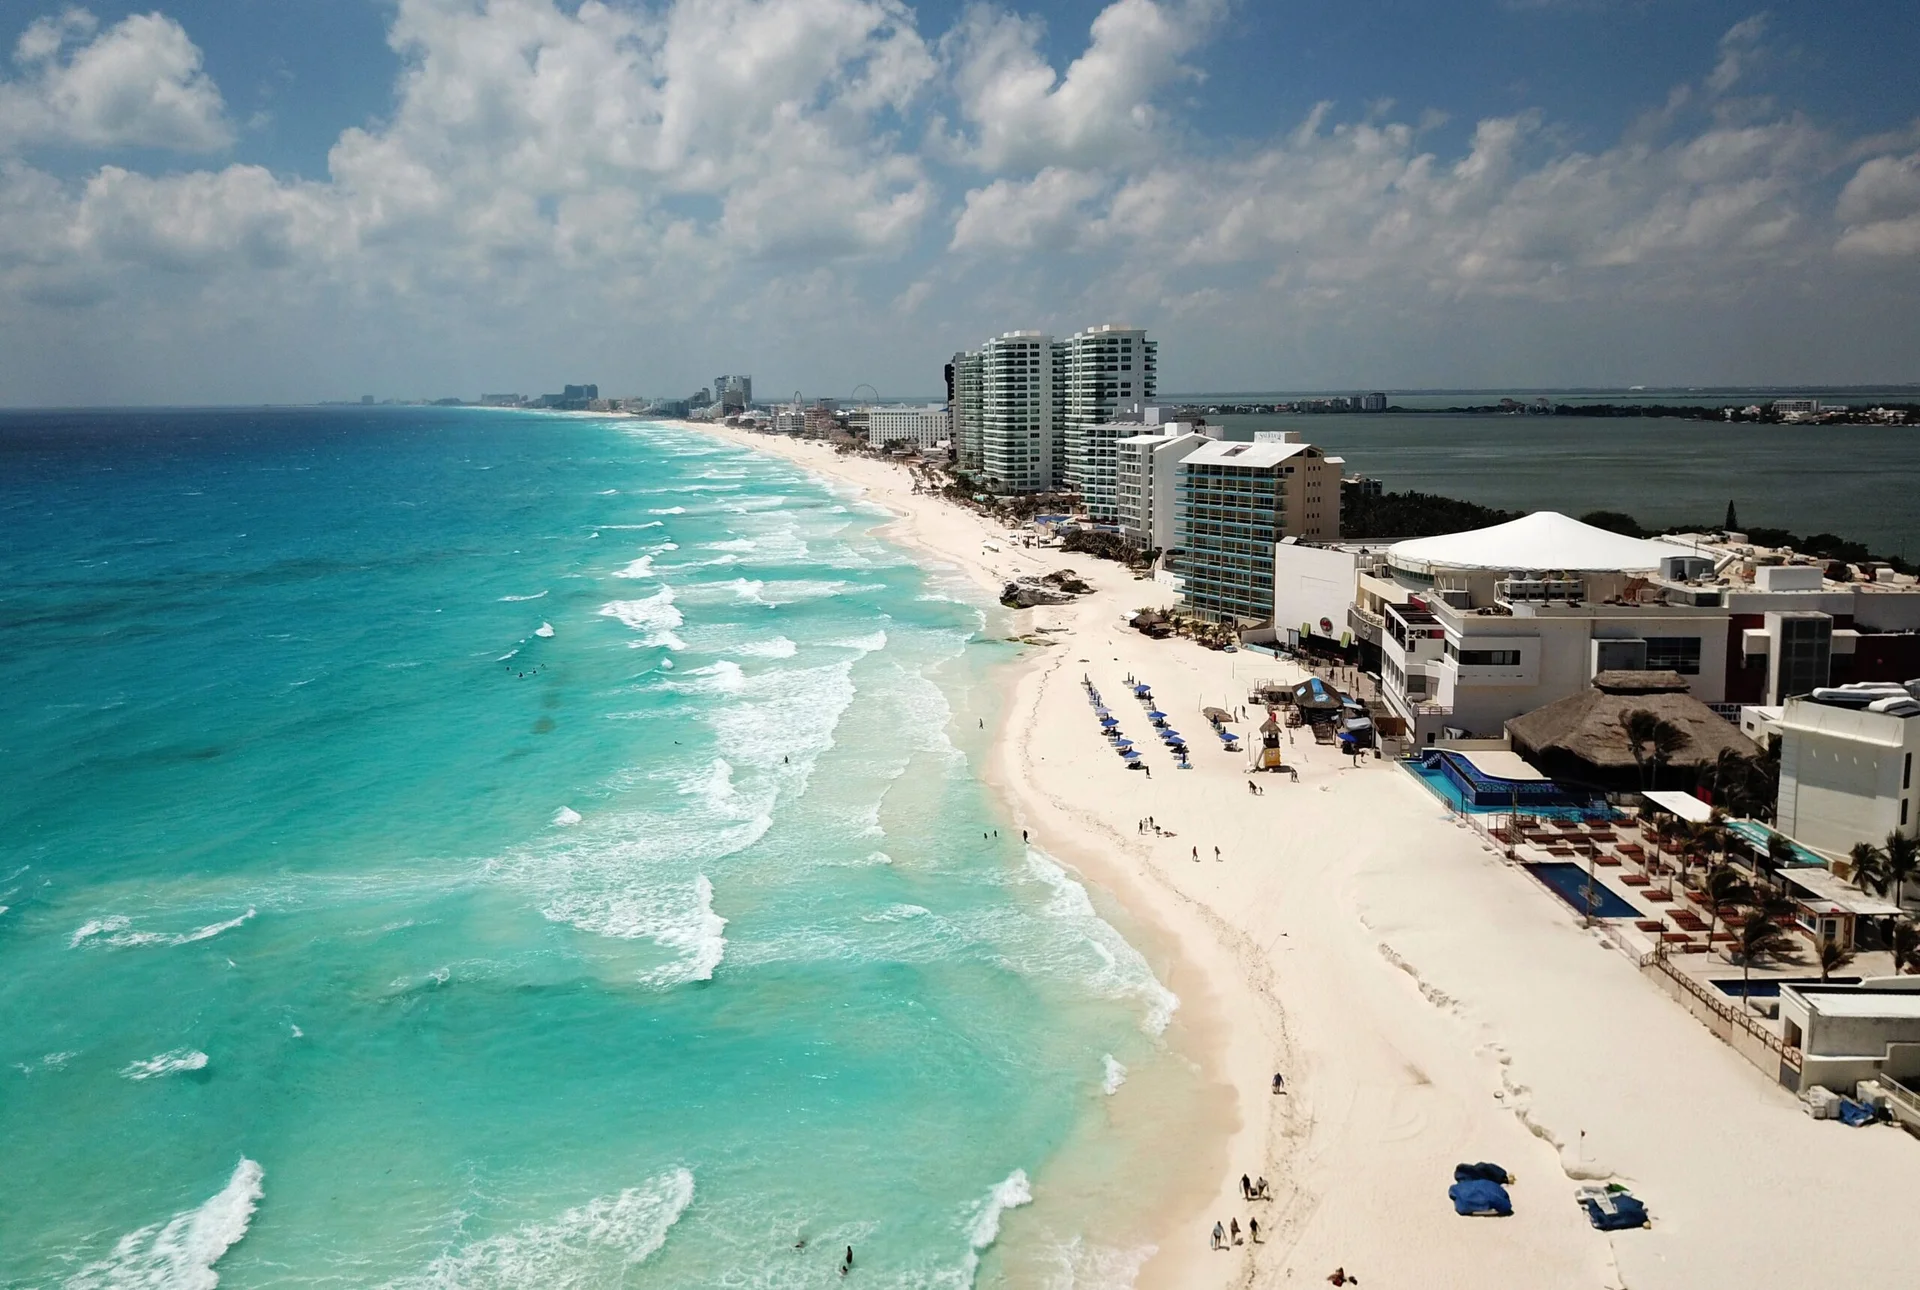 Travel warning for US citizens visiting Cancun from the State Department